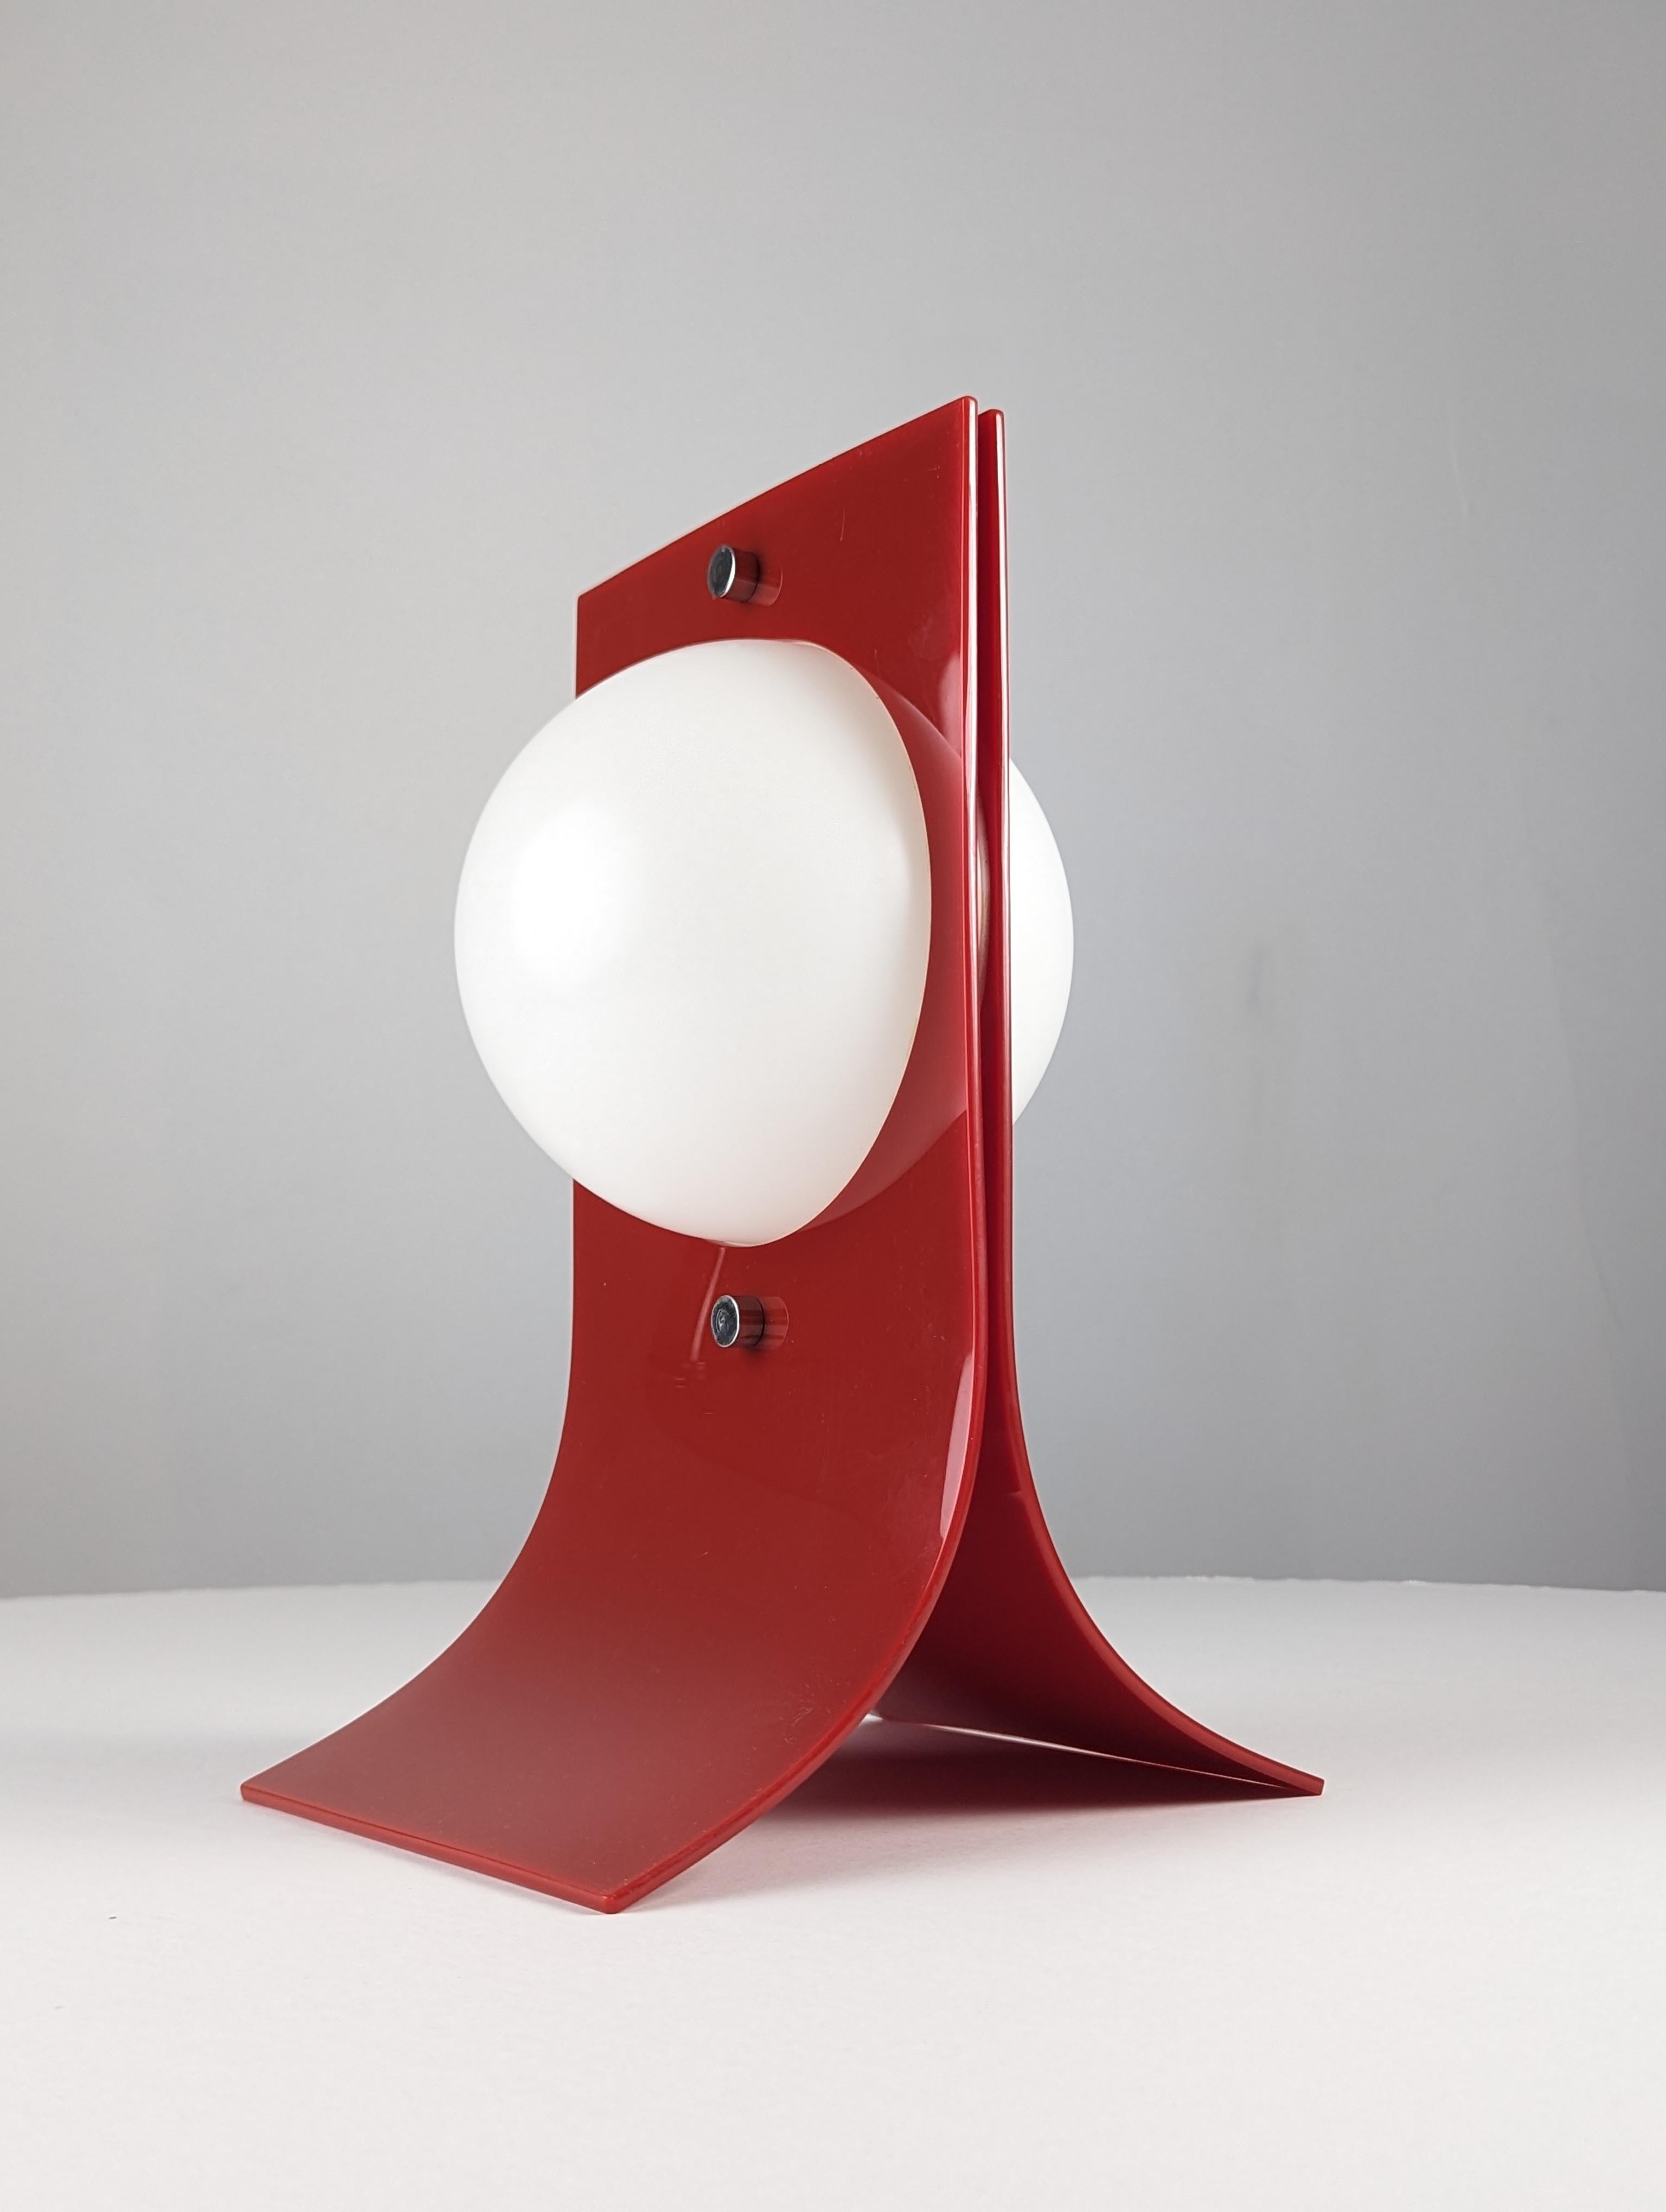 Fantastic Area lamp in an unusual red model attributed to the nicknamed Prince of Plastic by the New York Times, Neal Small. Who spearheaded the design in the late 1960s thanks to his sculptural lighting and furniture made of plastic and acrylic